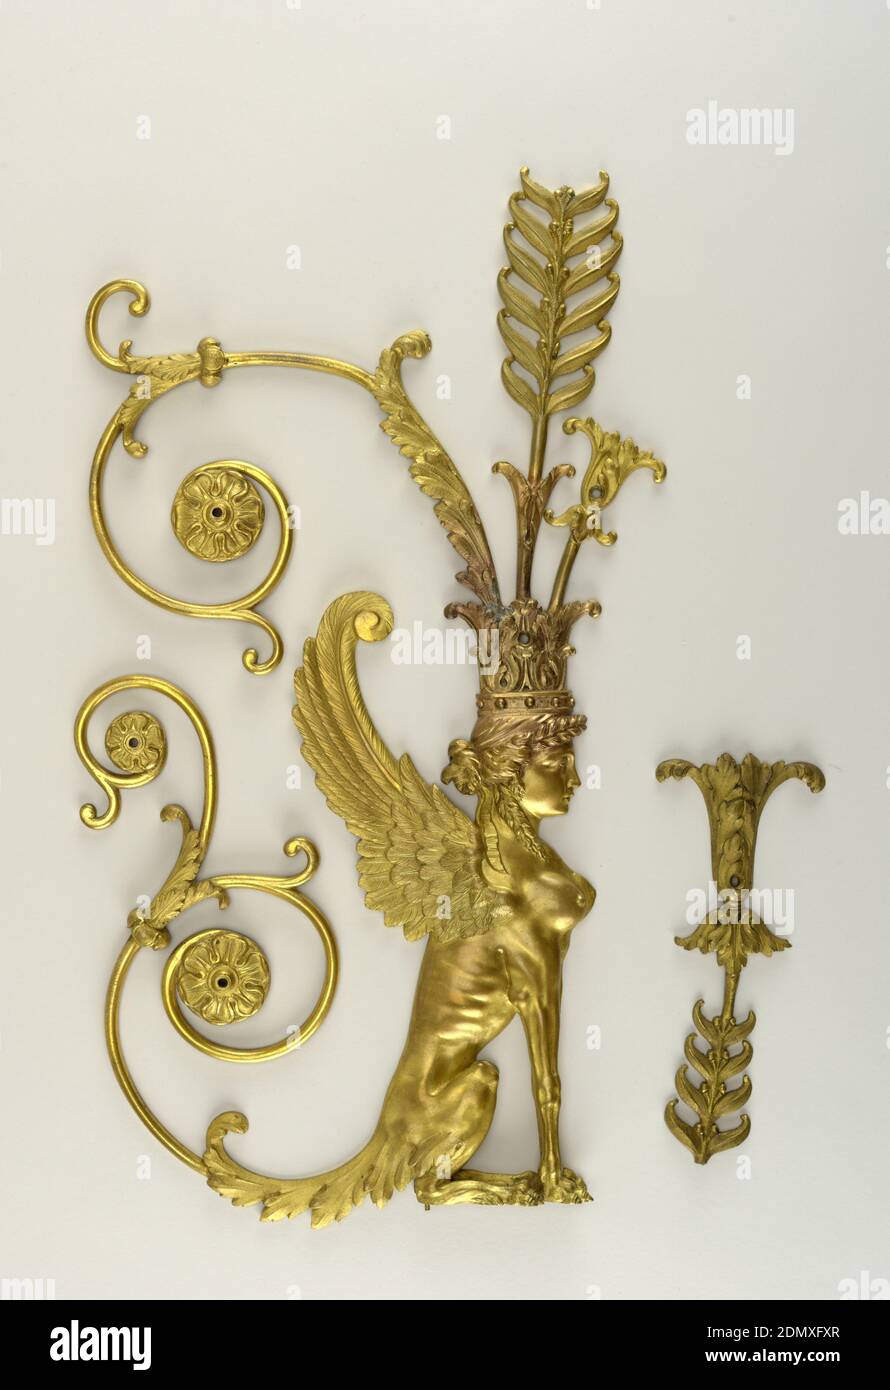 Mount, Gilt bronze, Winged female sphinx facing right with acanthus leaf crown from which springs an ancanthus-like flower, a tall symmetrically leafed and berried stem and a long spiraled leafed stem ending in a rosette. Sphinx's tail is an elongated acanthus leaf ending in a double spiraled stem, each of which terminates in a rosette. Seven screw holes and two small threaded projections under feet for attachment to wood. End broken off center stem projecting from crown., ca. 1805, Decorative Arts, Mount Stock Photo